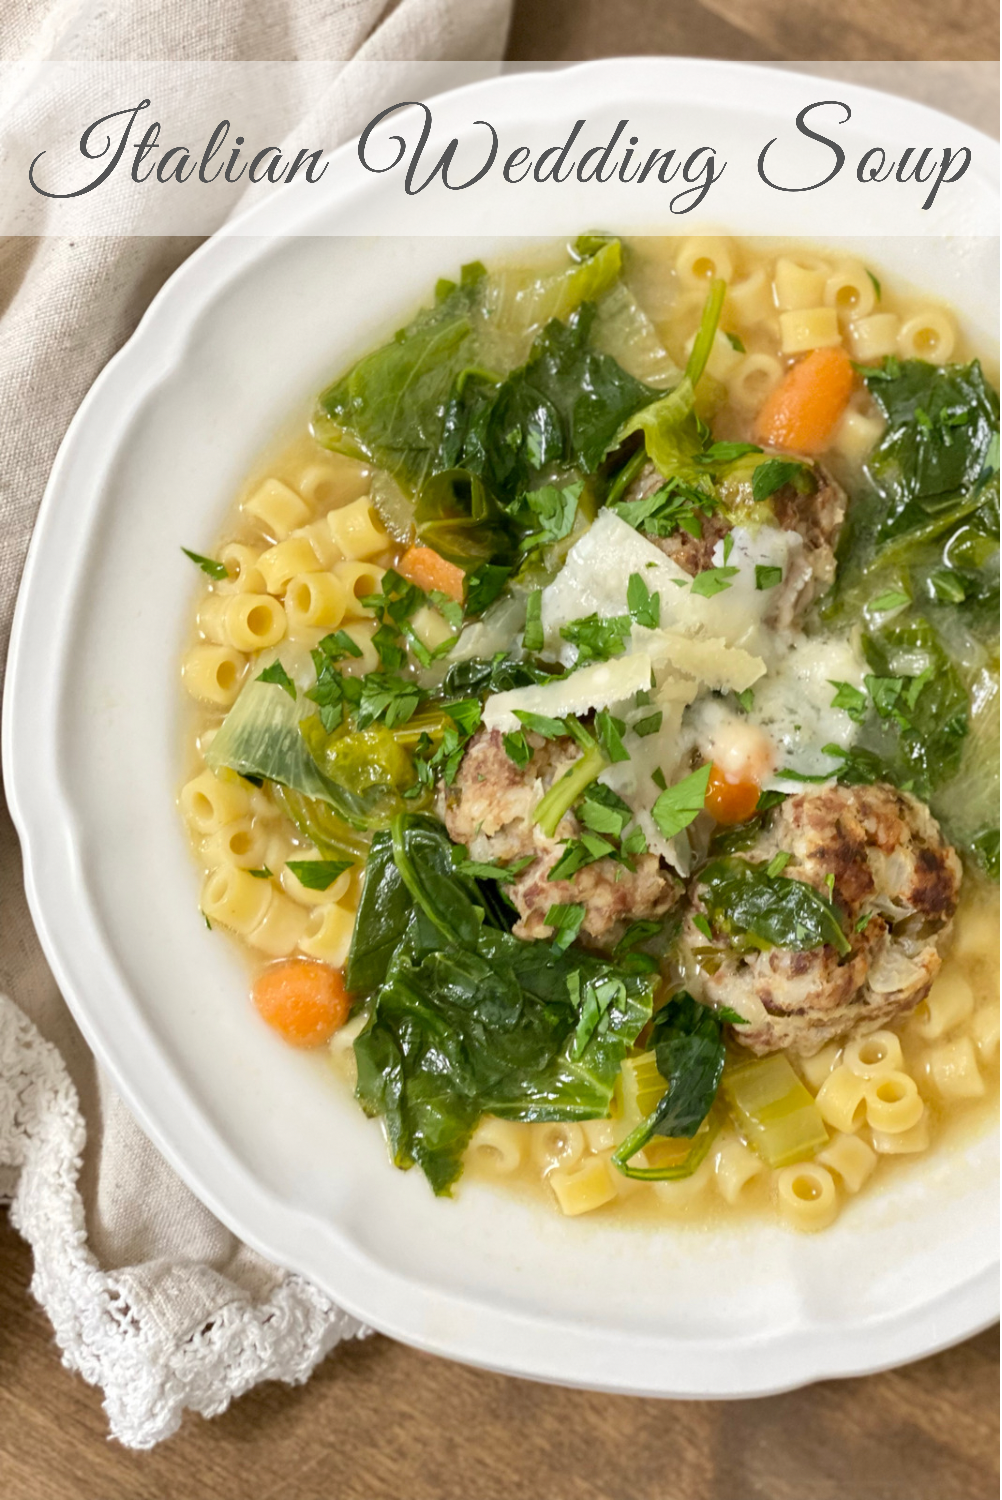 Pinterest Pin for Italian Wedding Soup in a white bowl with a napkin on the side.